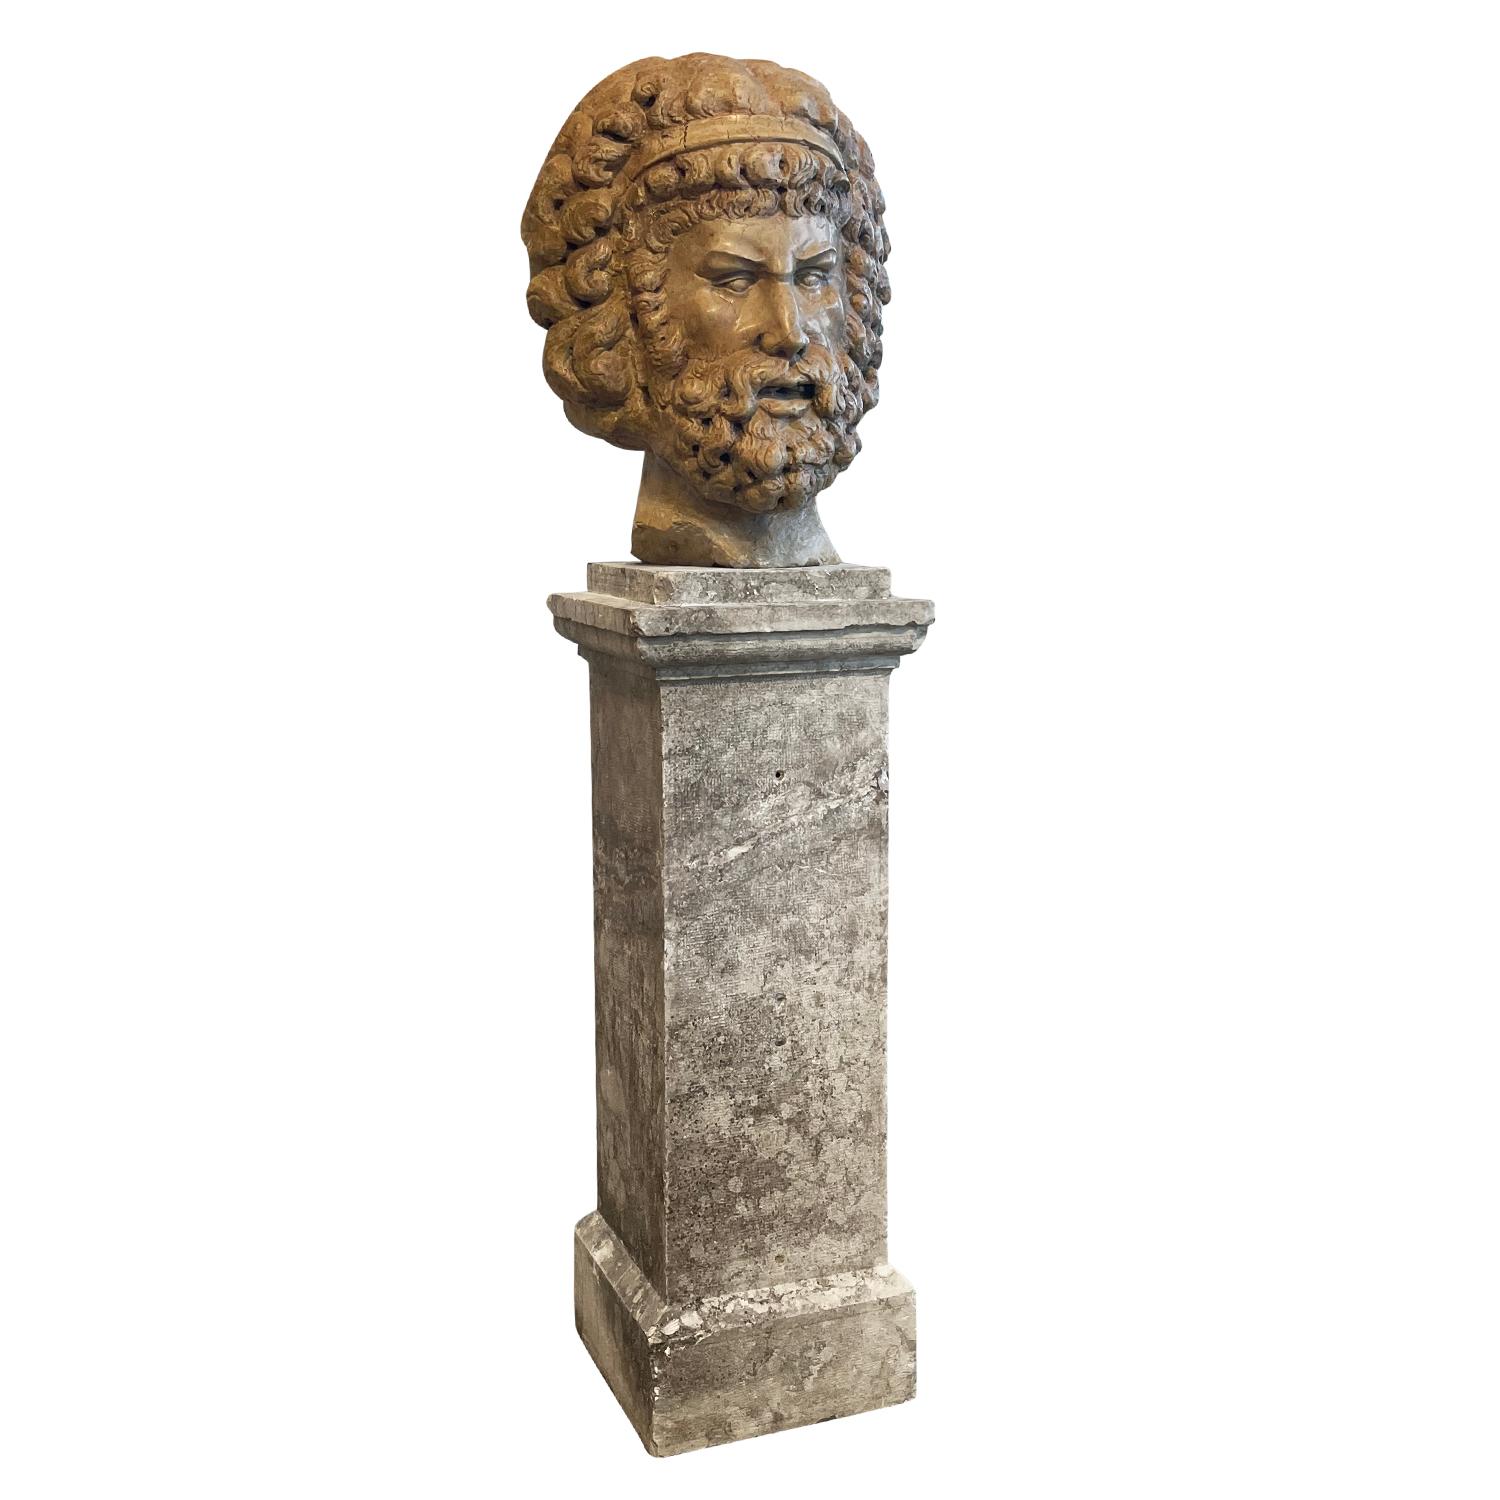 An antique hand carved Rosso Verona marble sculpture or mask of Zeus with detailed carvings, in good condition. Similar can be viewed at the temple collection in the British museum in London. Wear consistent with age and use, circa 19th century,